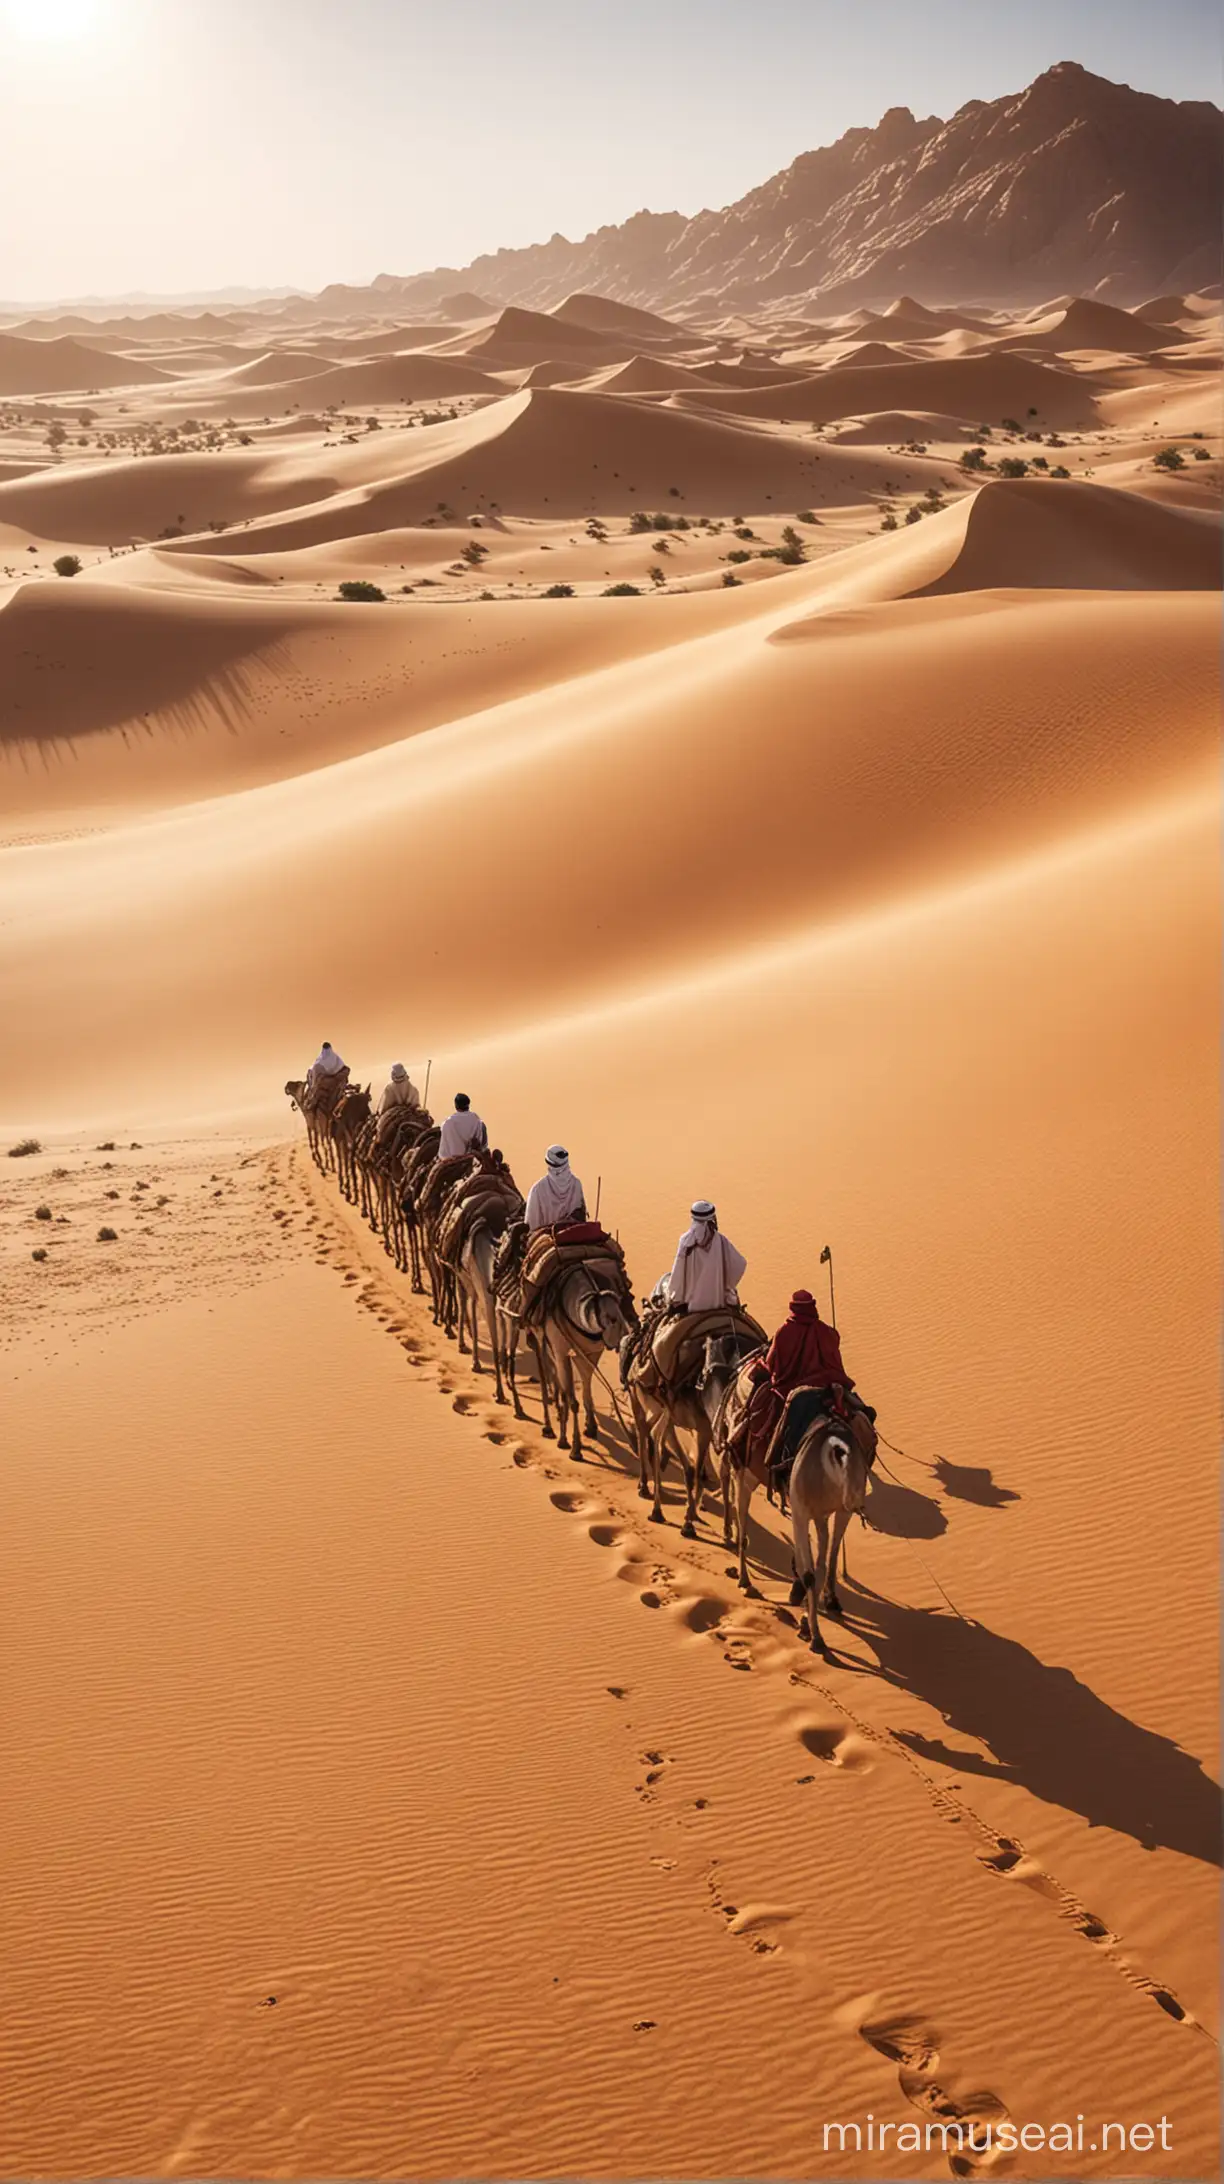  Visualize a caravan journey across the Arabian desert during the Islamic era, highlighting the importance of trade routes in connecting distant lands.